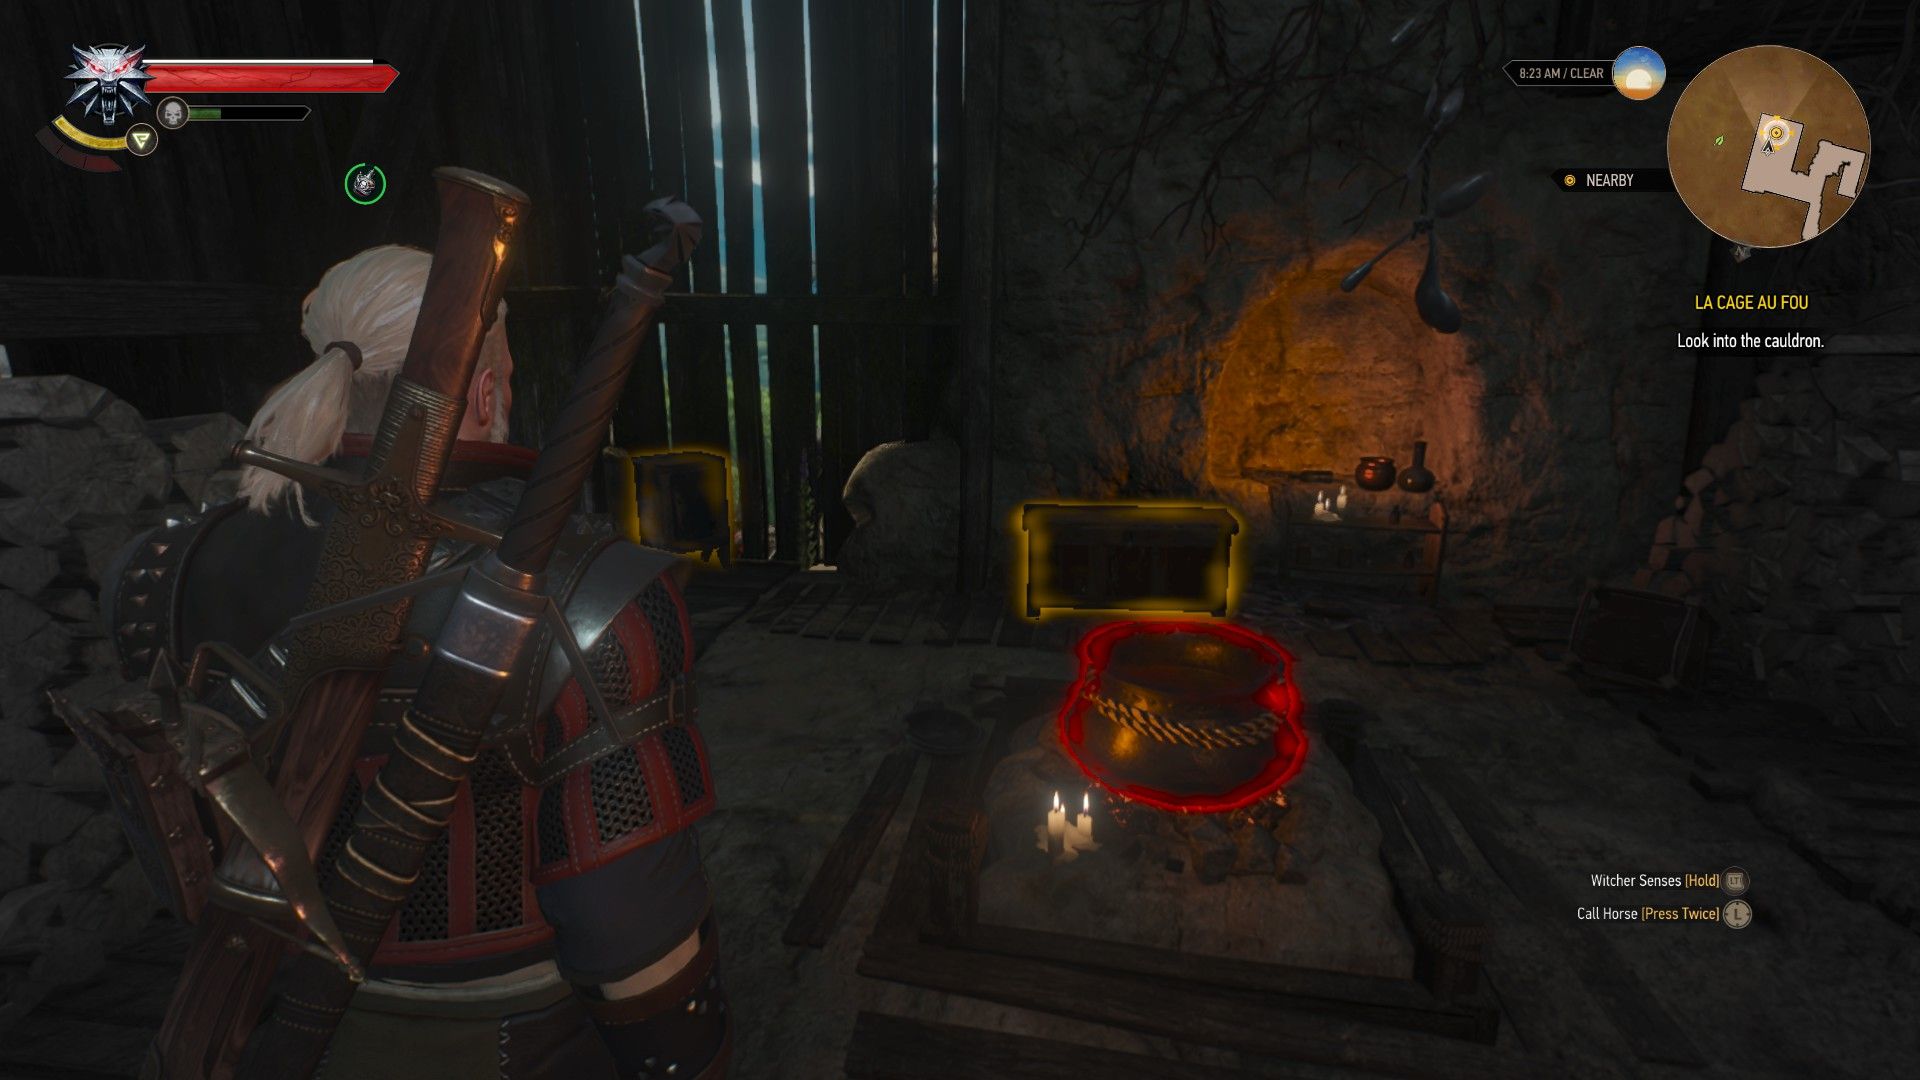 A screenshot of Geralt's Witcher Senses showing the cauldron needed for the quest in red.